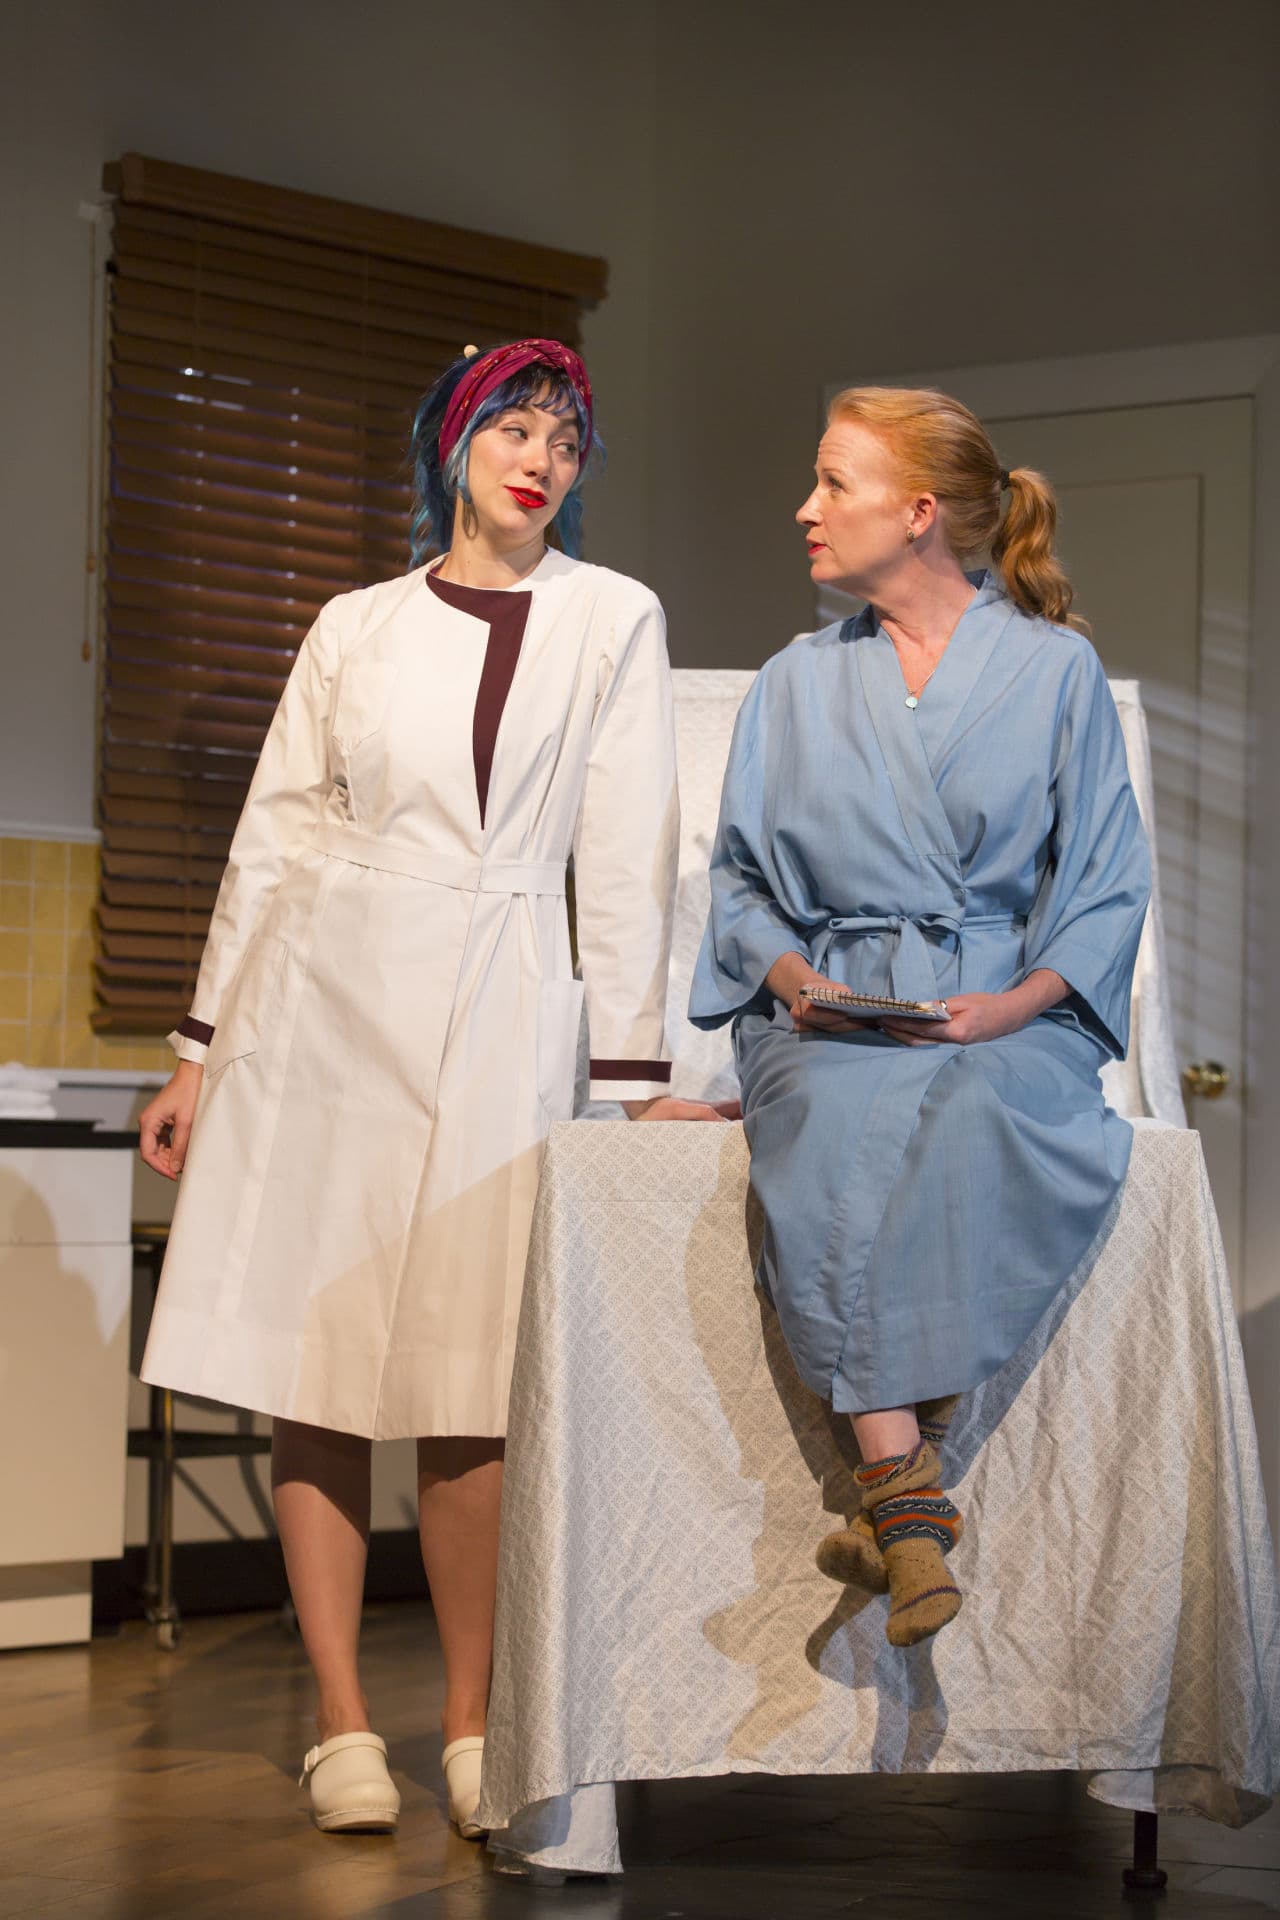 Madeline Wise and Johanna Day in "Choice" at the Huntington. (T. Charles Erickson)